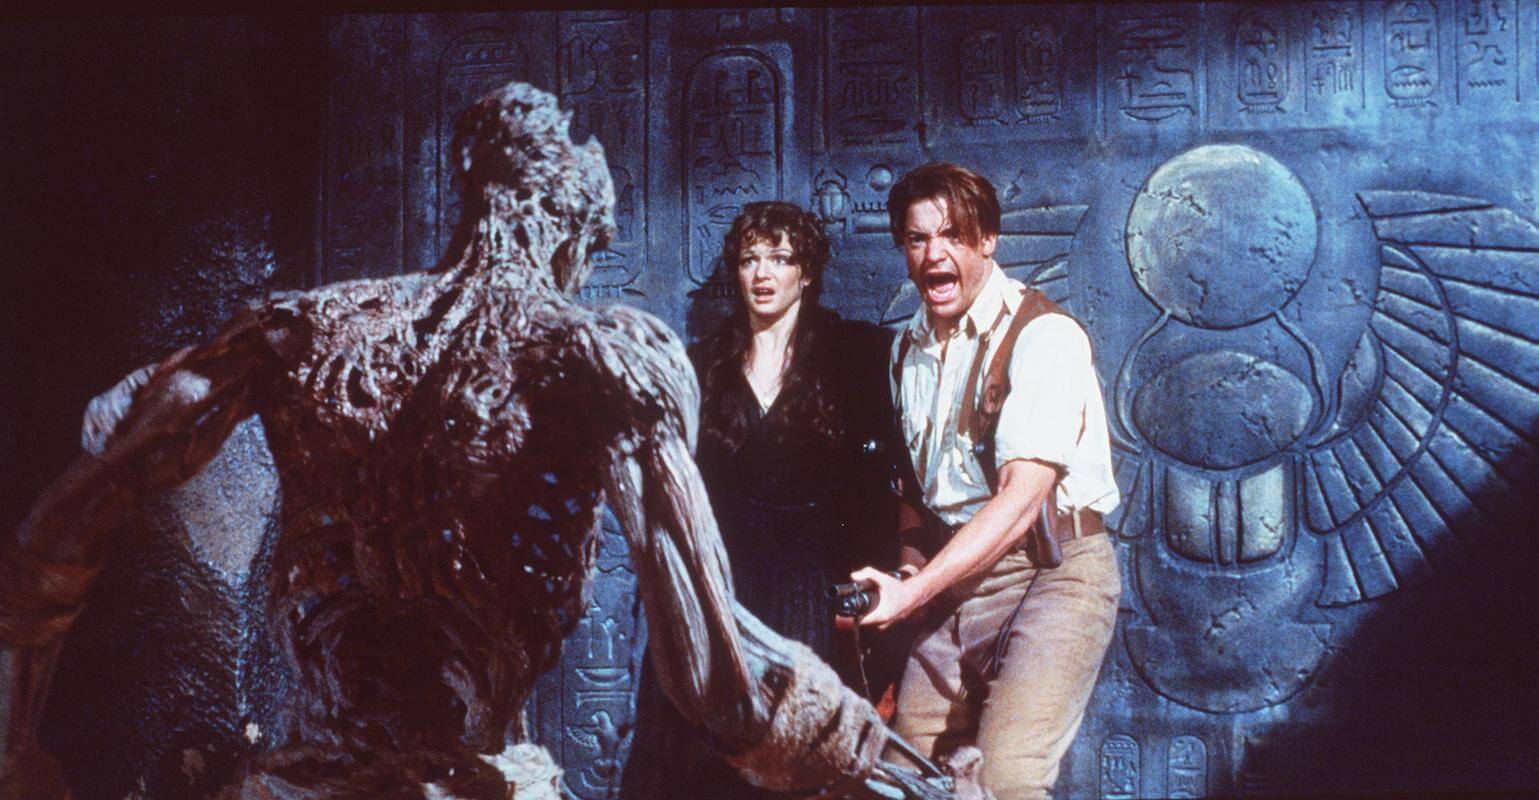 Brendan Fraser screams at The Mummy and protects Rachel Weisz